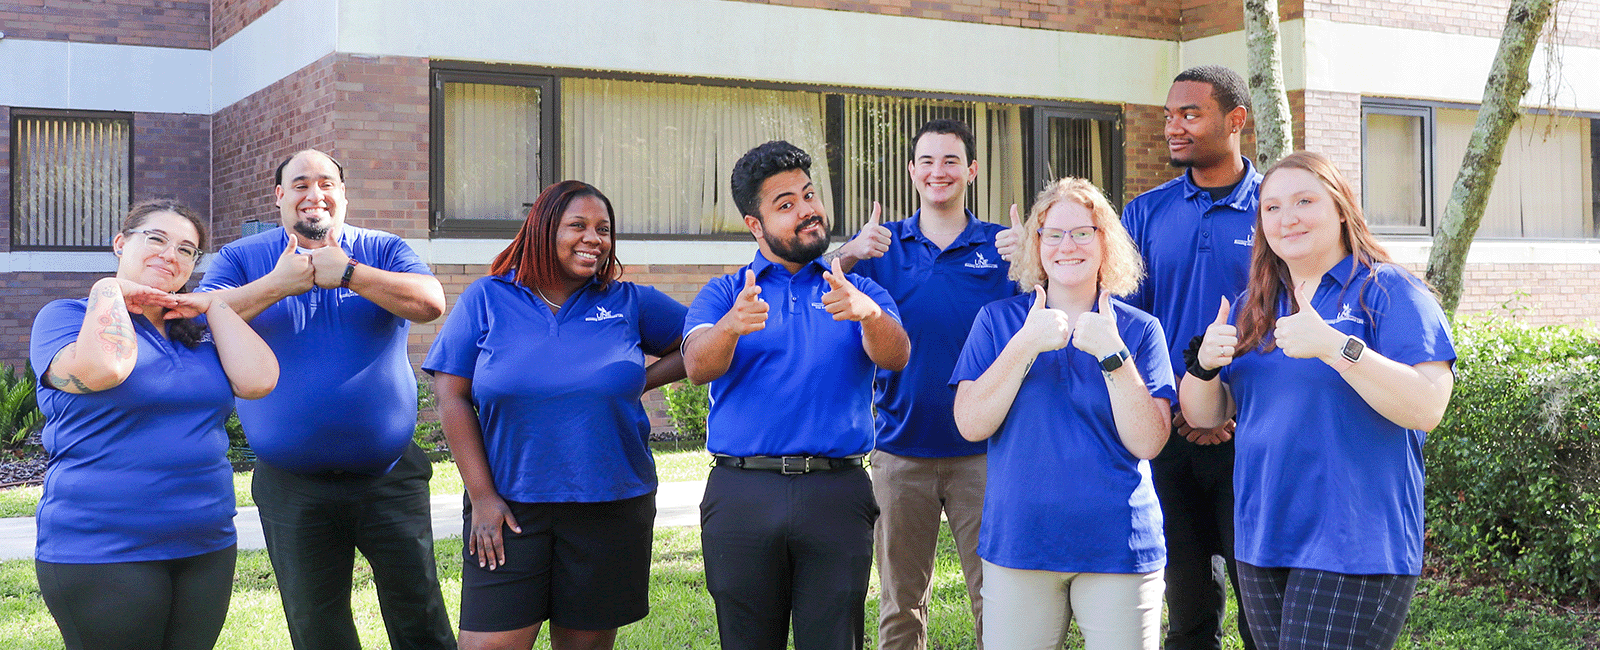 UNF residence Life coordinators smiling and having fun on a beautiful sunny day